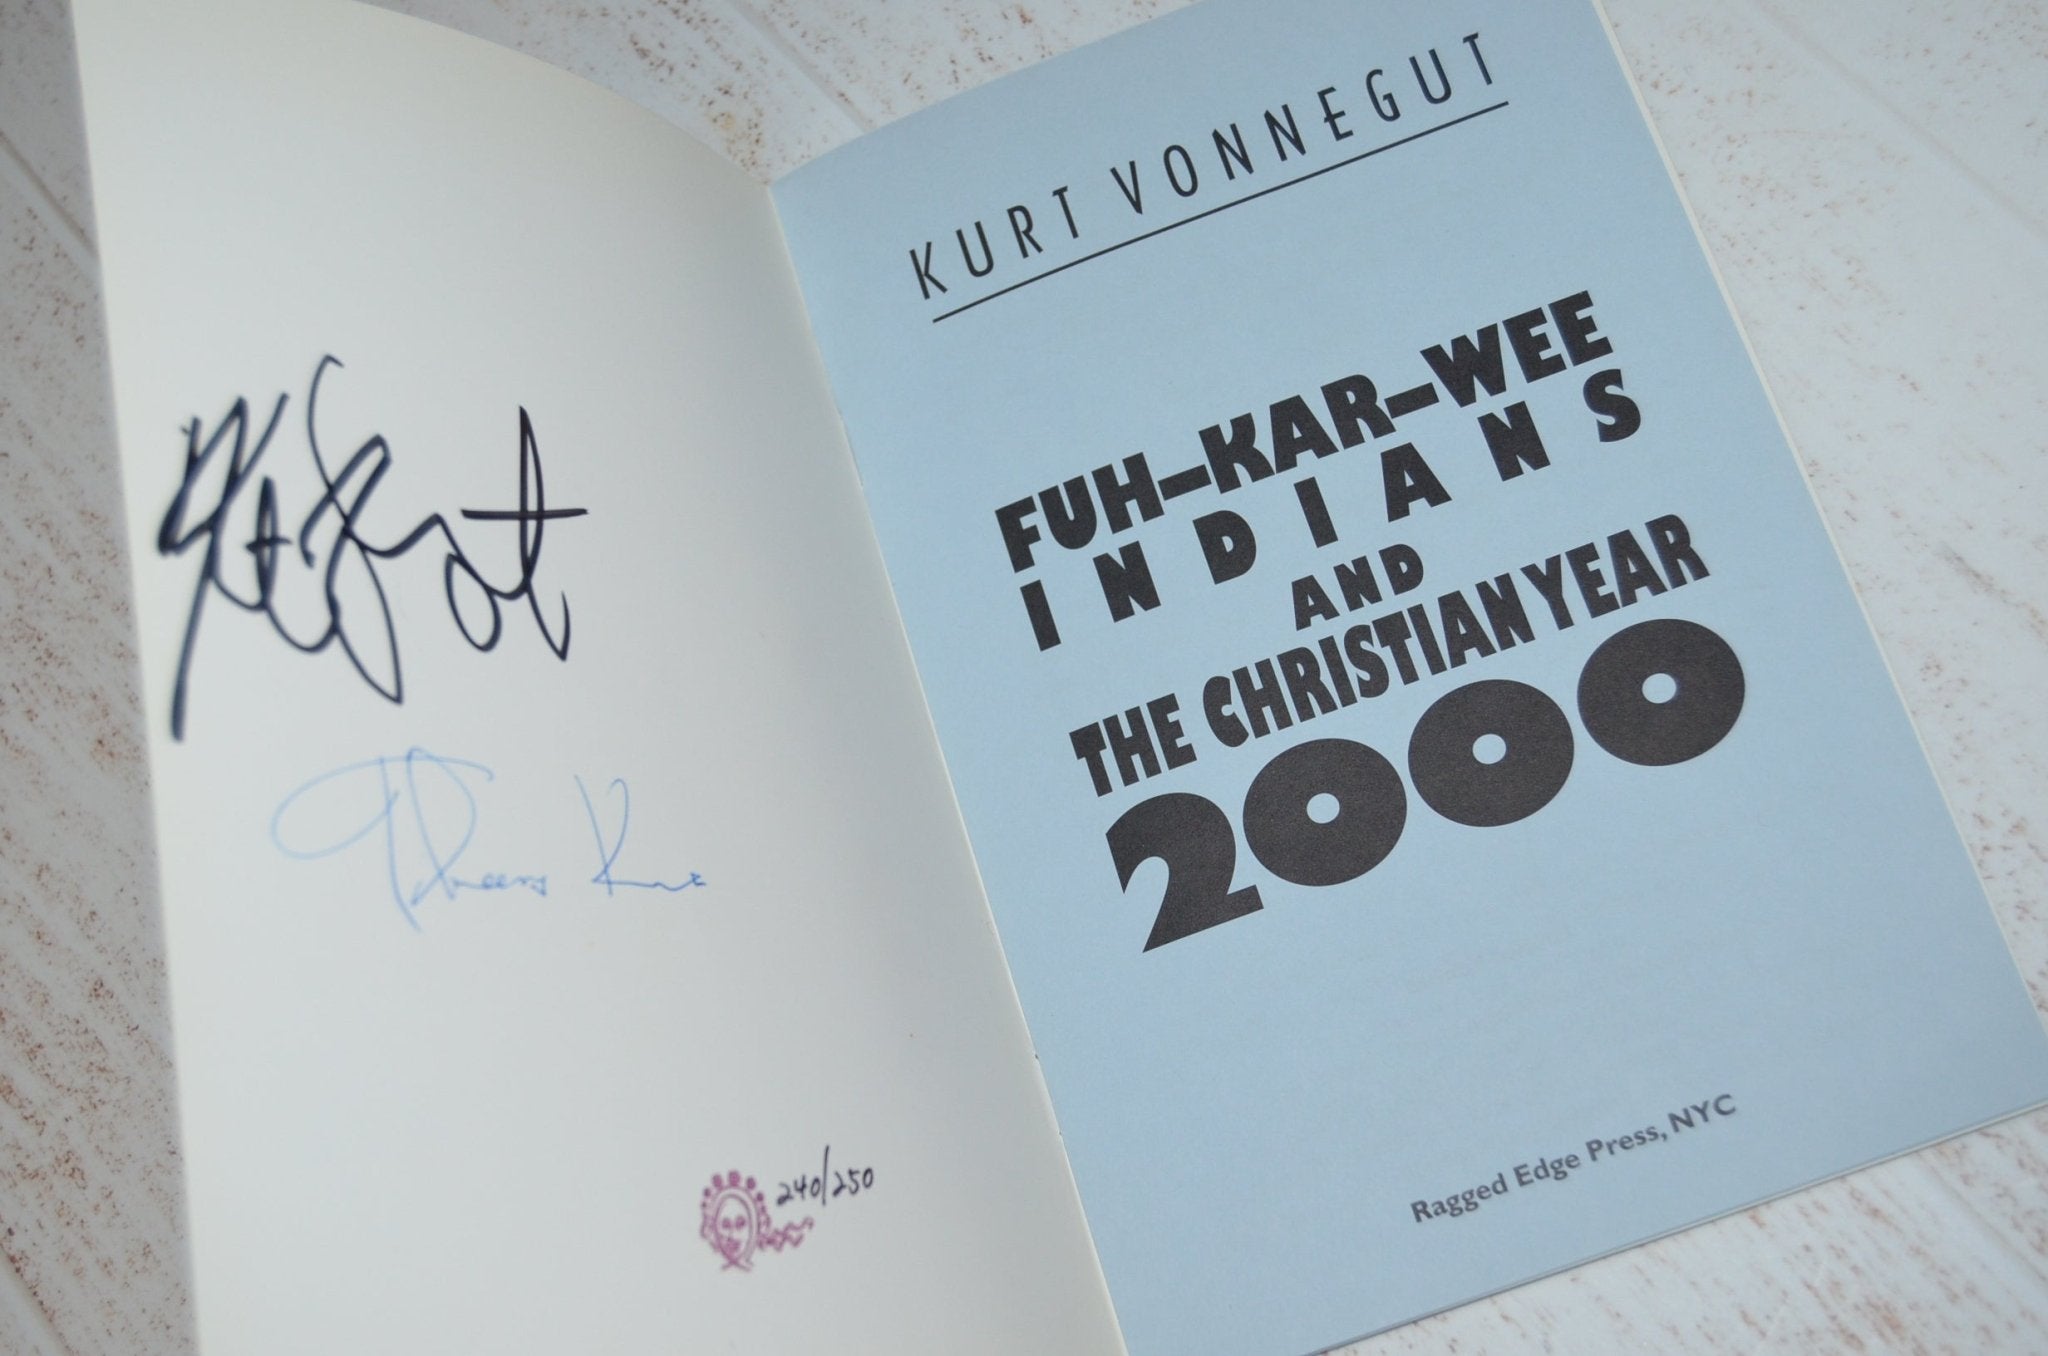 2 Signed Limited Editions – Fuh-kar-wee Indians & The Christian Year 2000 by Kurt Vonnegut - Brookfield Books